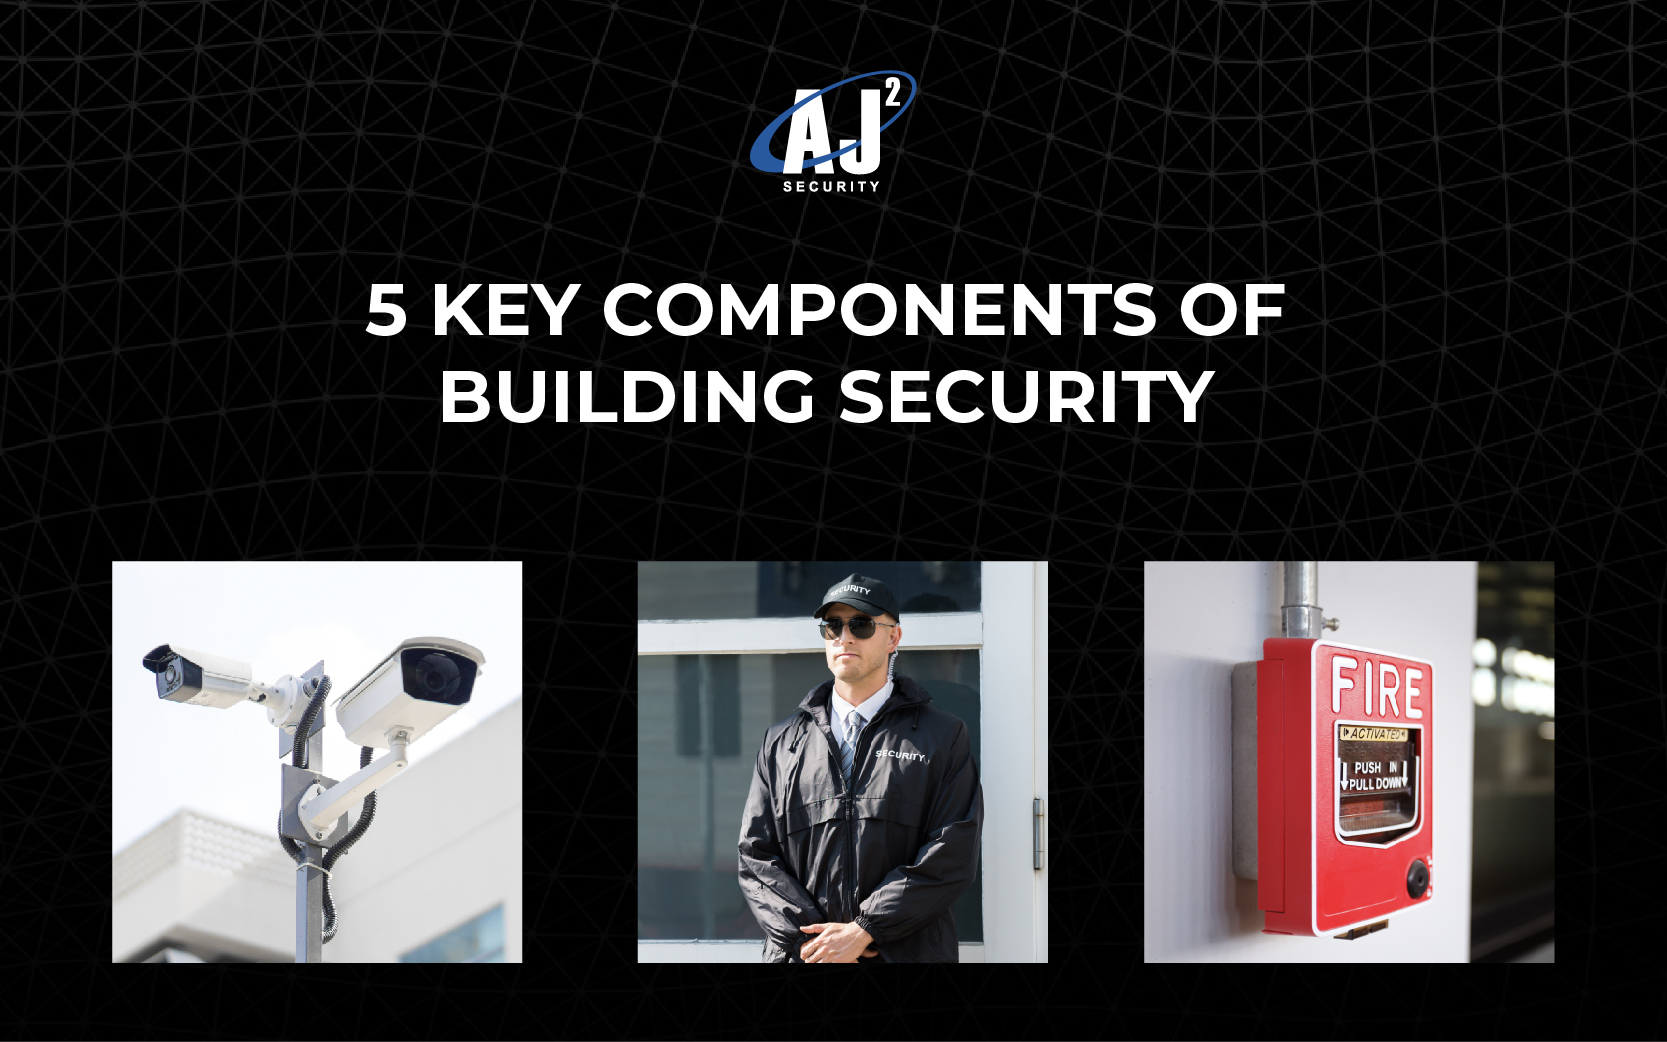 Building security is composed of many essential features, including guards. Discover how to equip your building for safety with AJ Squared Security.